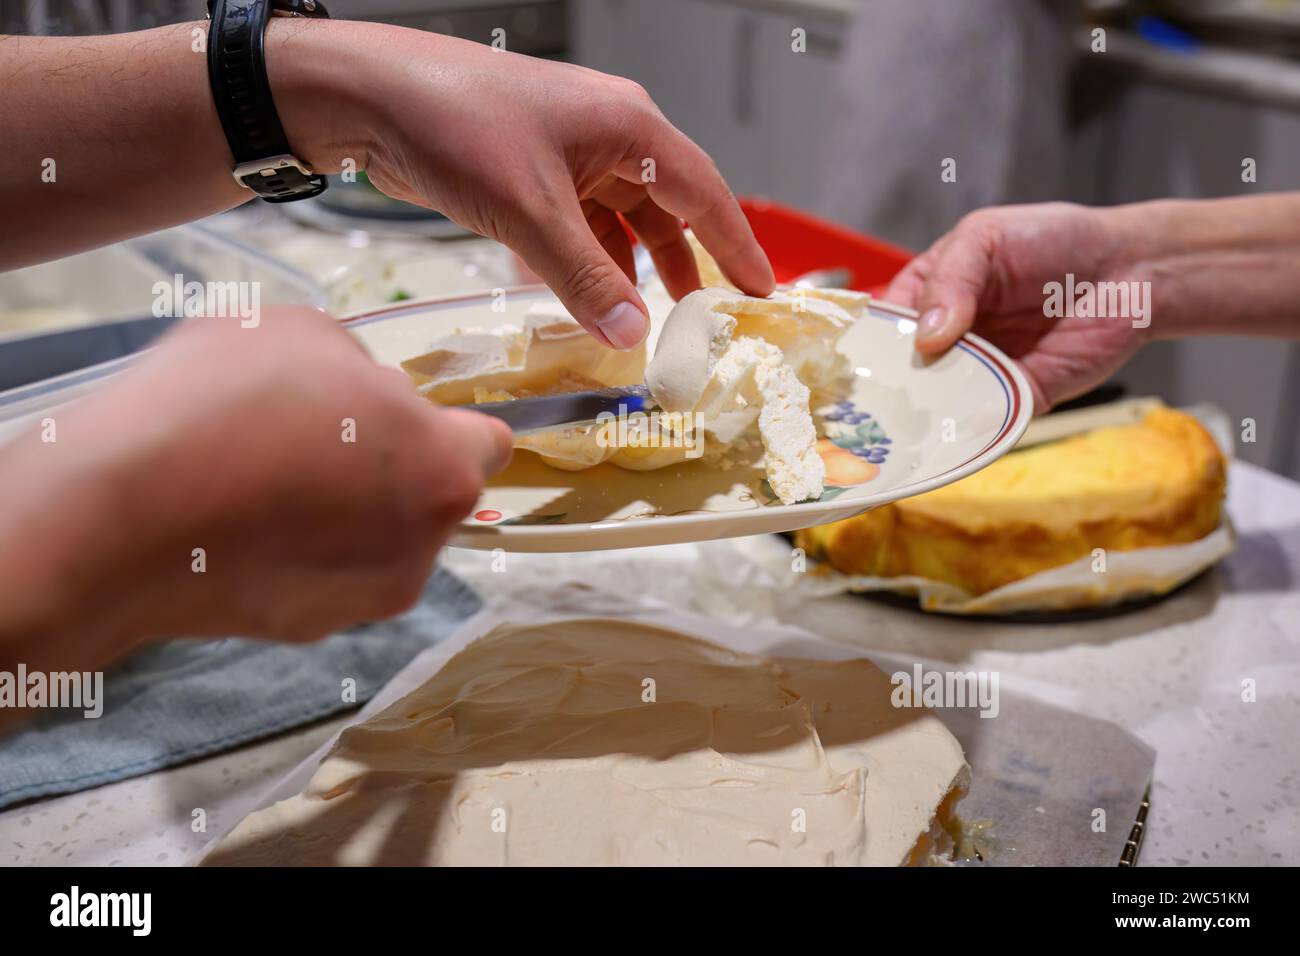 Hands holding a plate and sharing pavlova over the kitchen benchtop. Home cooking and entertainment concept. Stock Photo